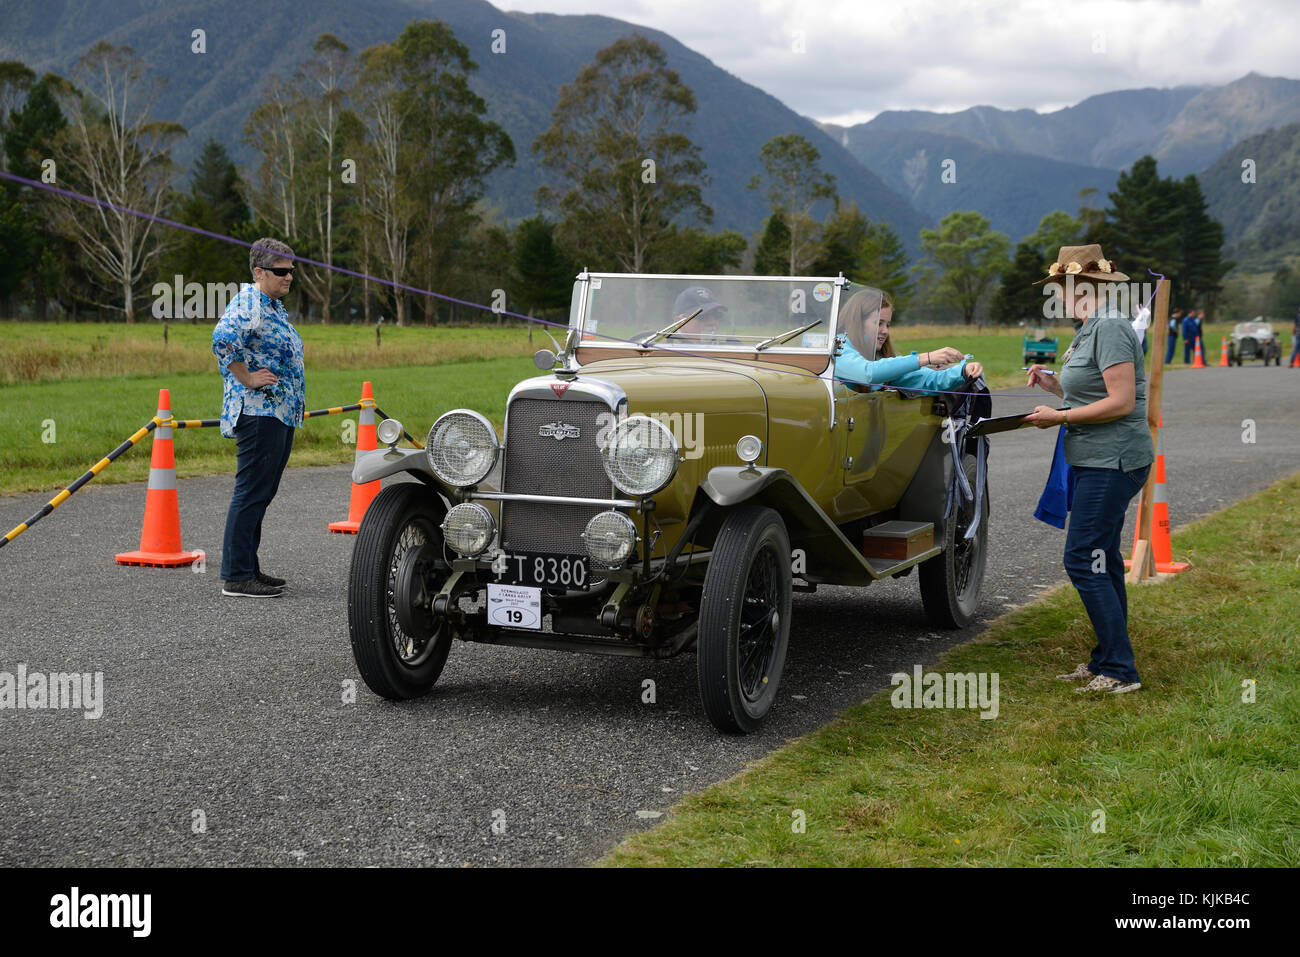 HAUPIRI, NEW ZEALAND, MARCH 18, 2017: Contestants in a vintage car rally hang out washing in a timed competition. The vehicle is a 1930 Alvis Silver S Stock Photo